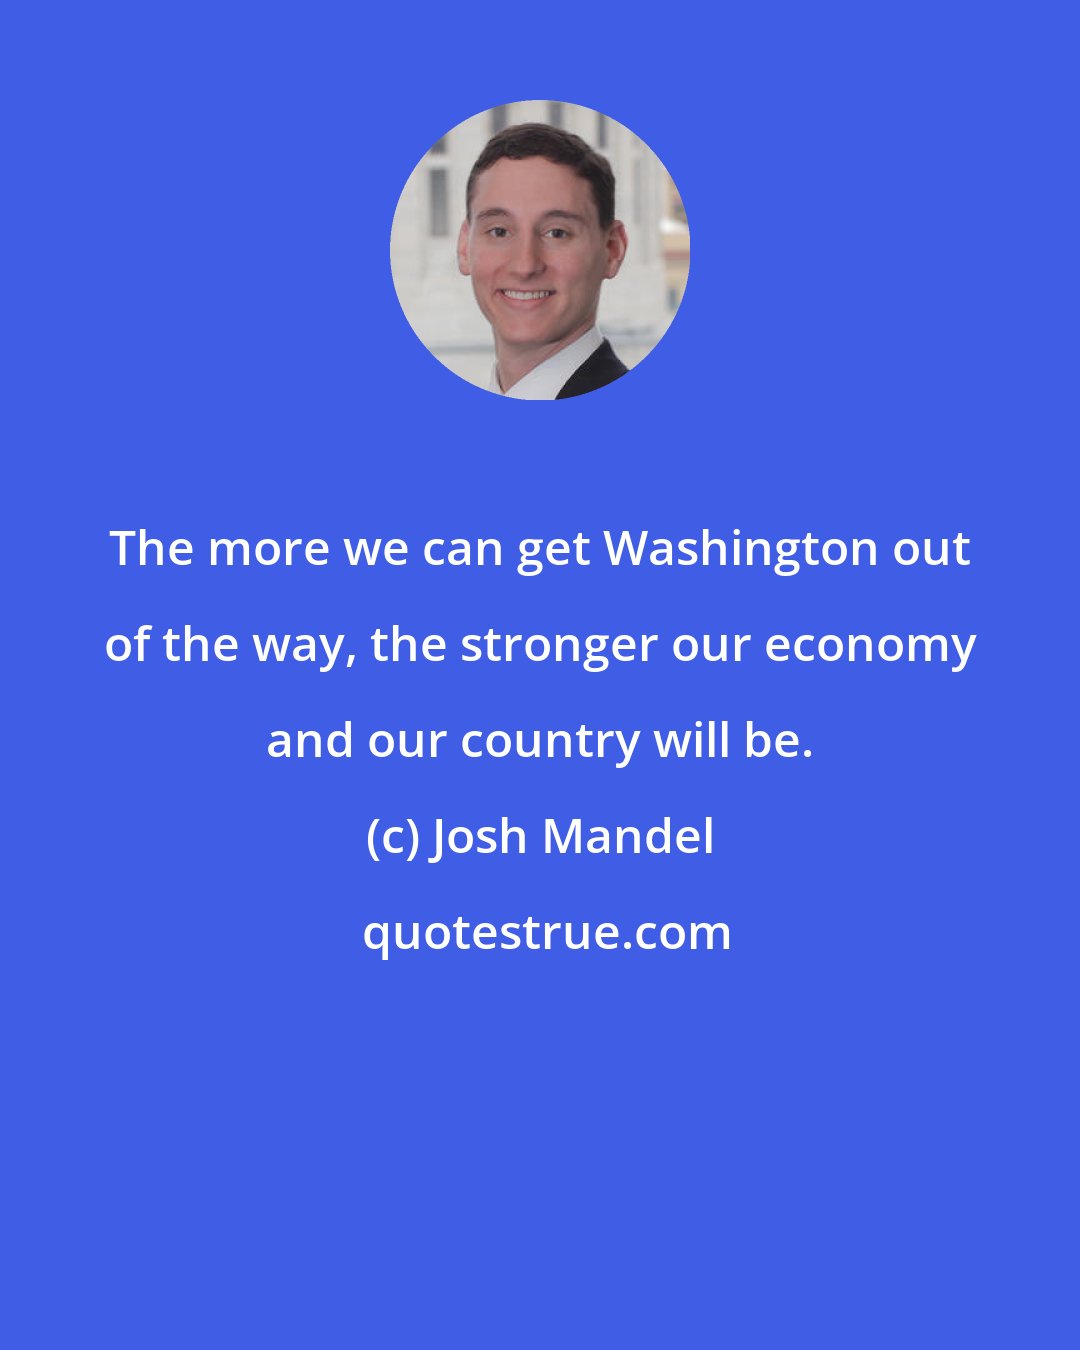 Josh Mandel: The more we can get Washington out of the way, the stronger our economy and our country will be.